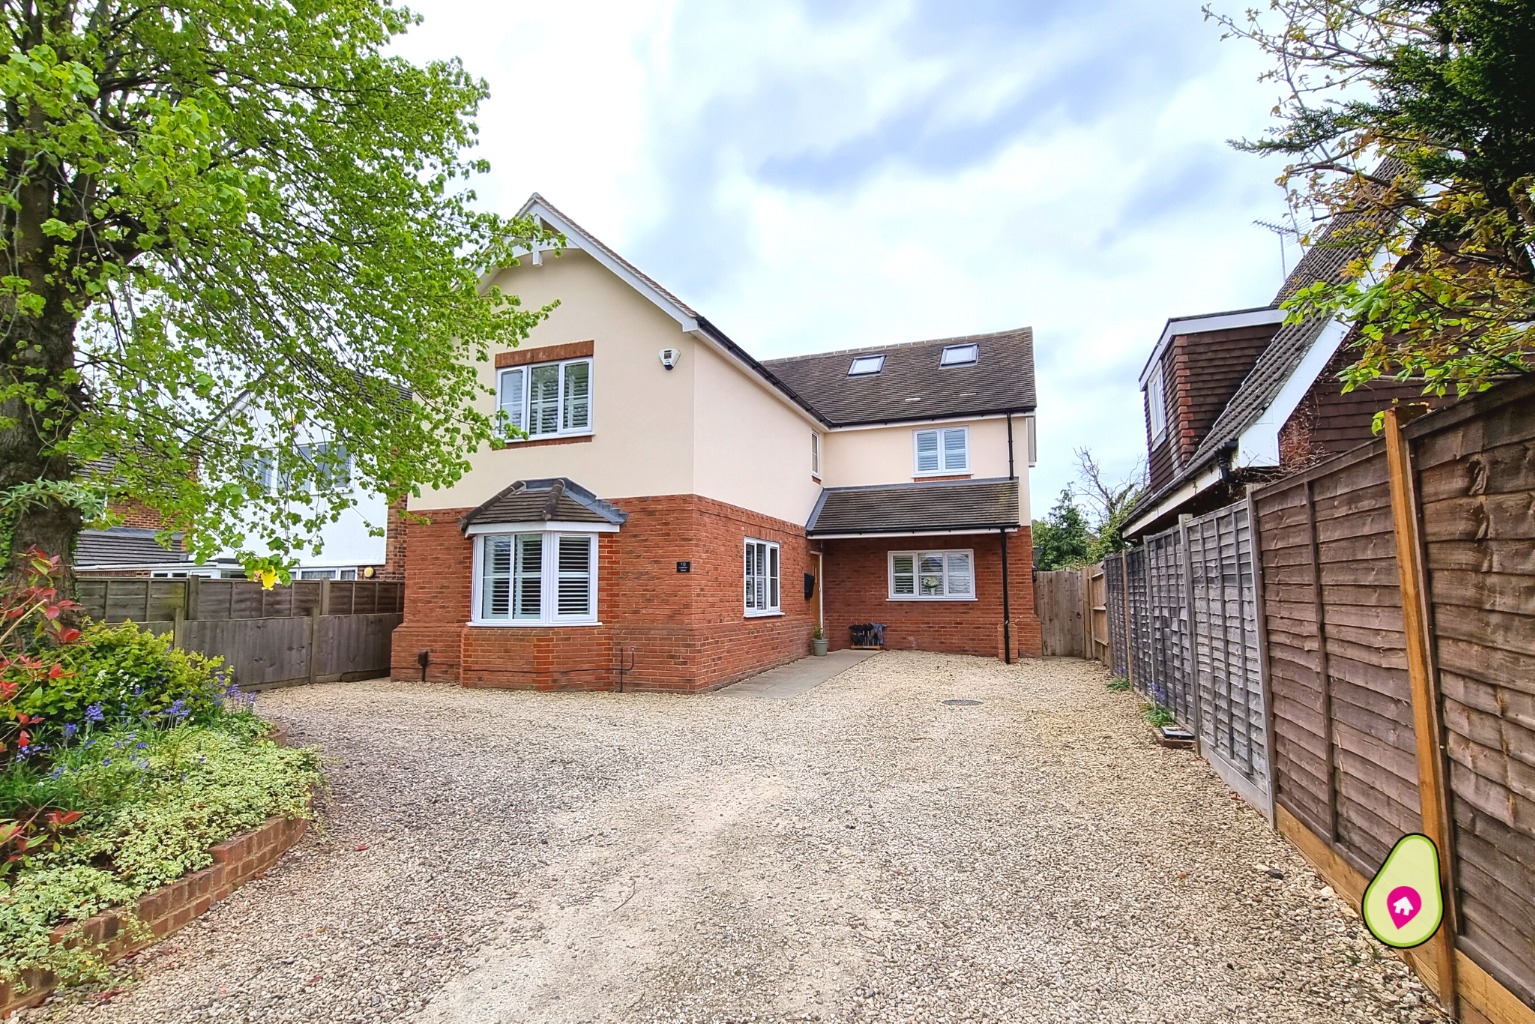 5 bed detached house for sale in Lowther Road, Wokingham, RG41